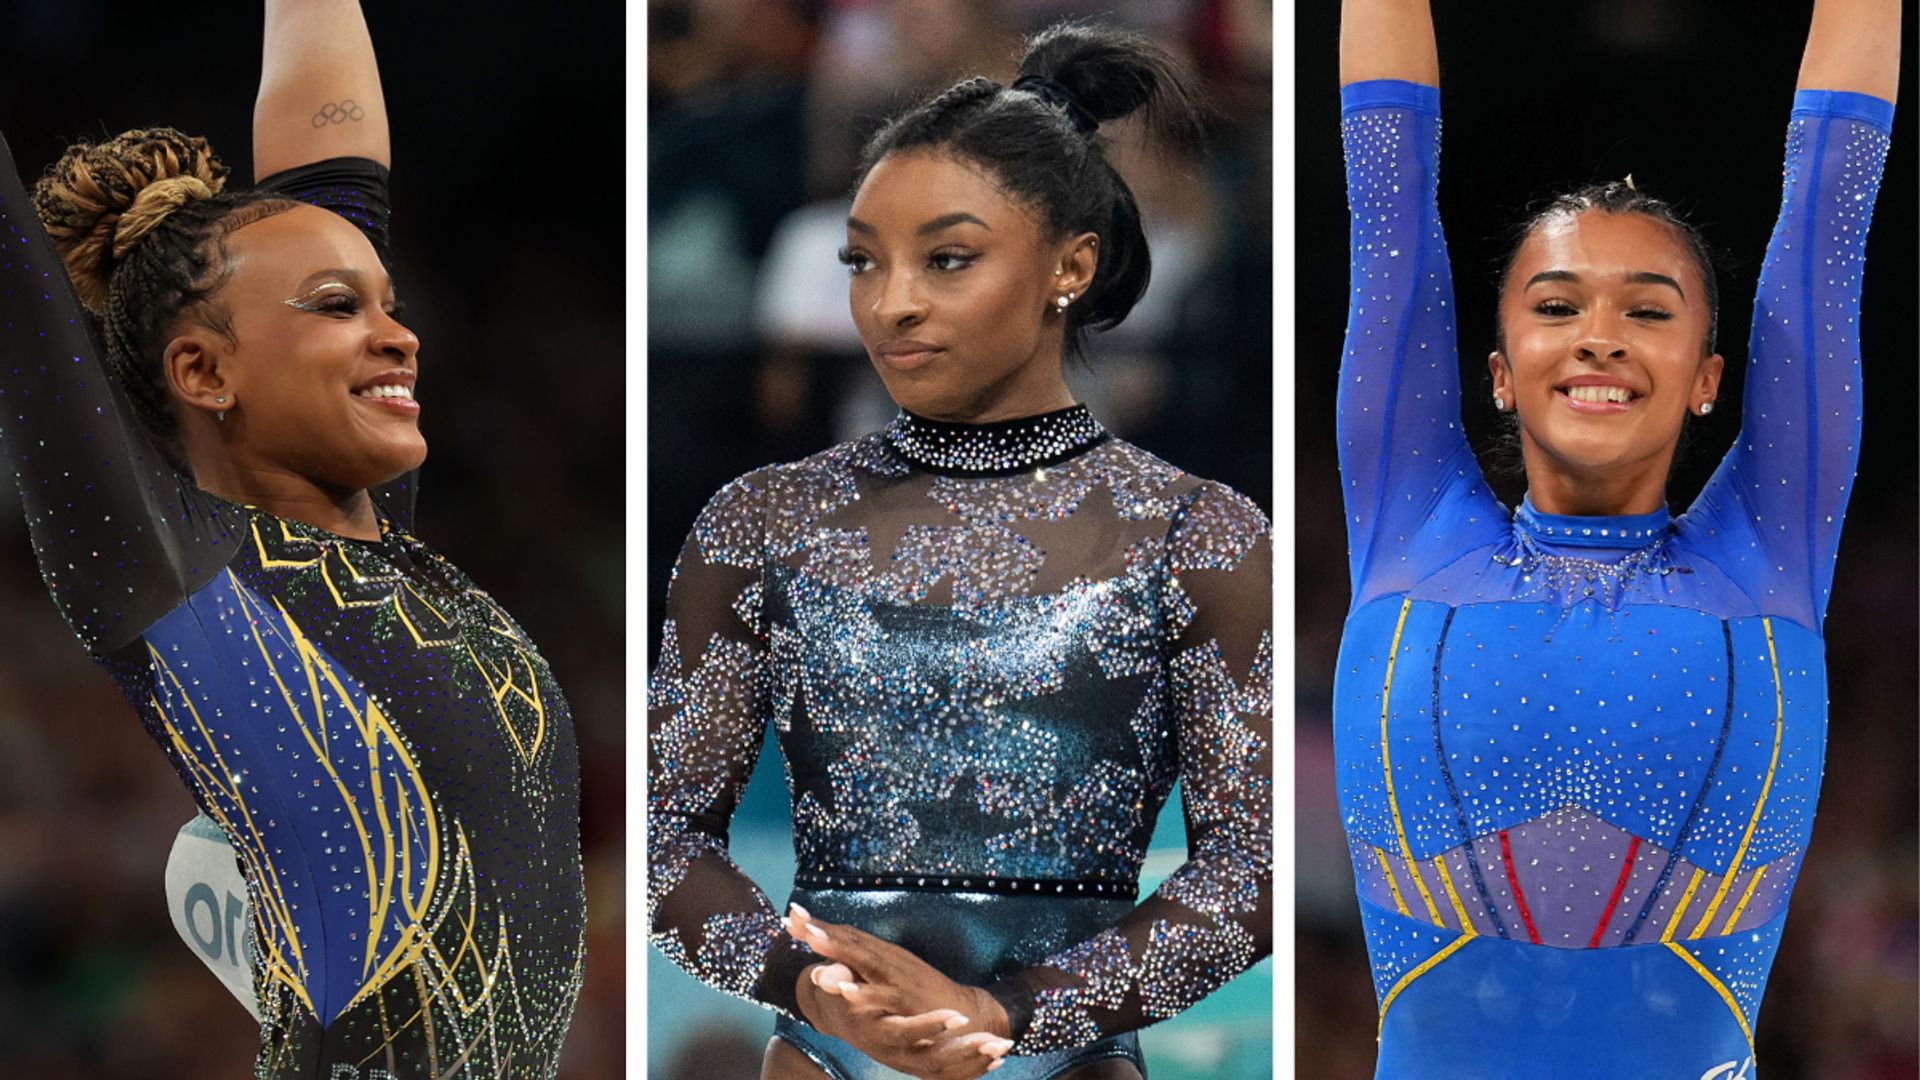 Biles and Lee face fierce Latina rivals in 2024 Olympic gymnastics finals